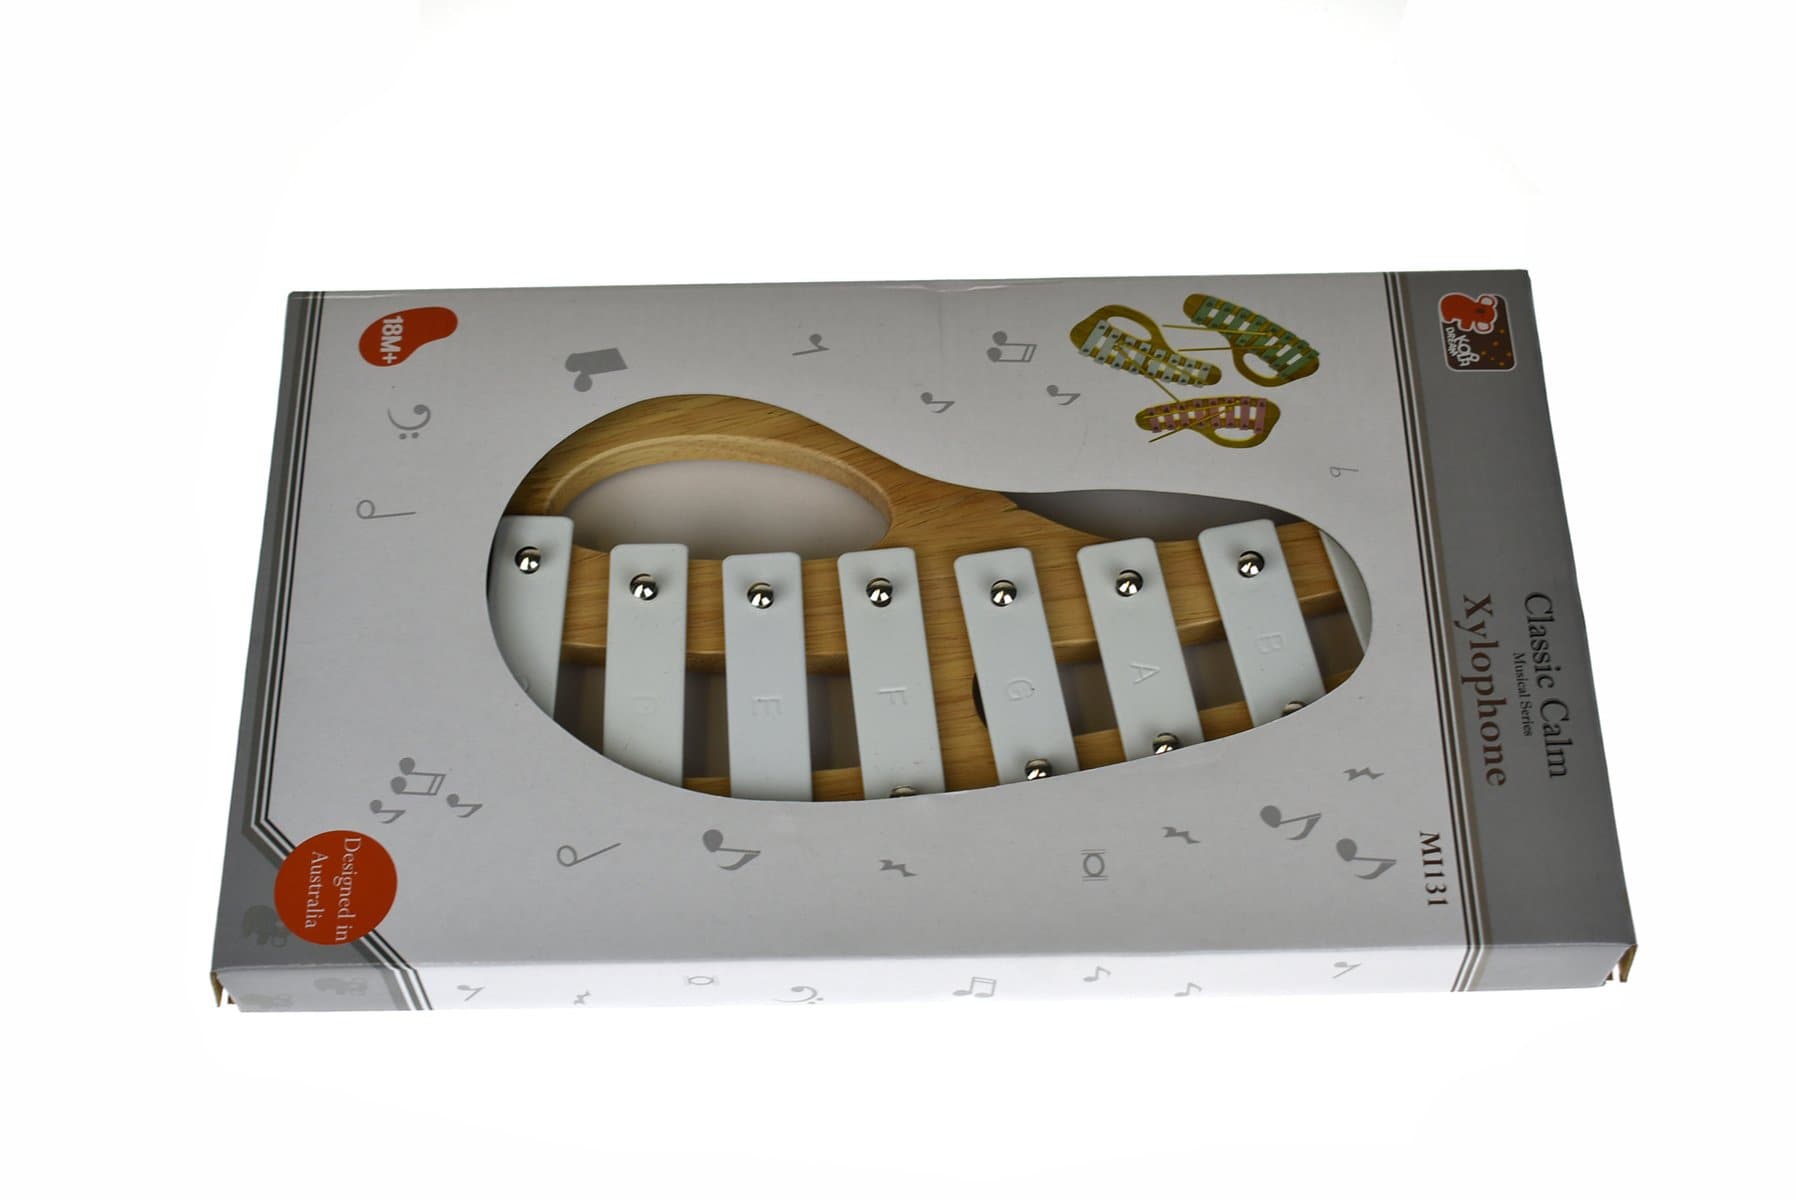 toys for infant Classic Calm Wooden Xylophone Casper White